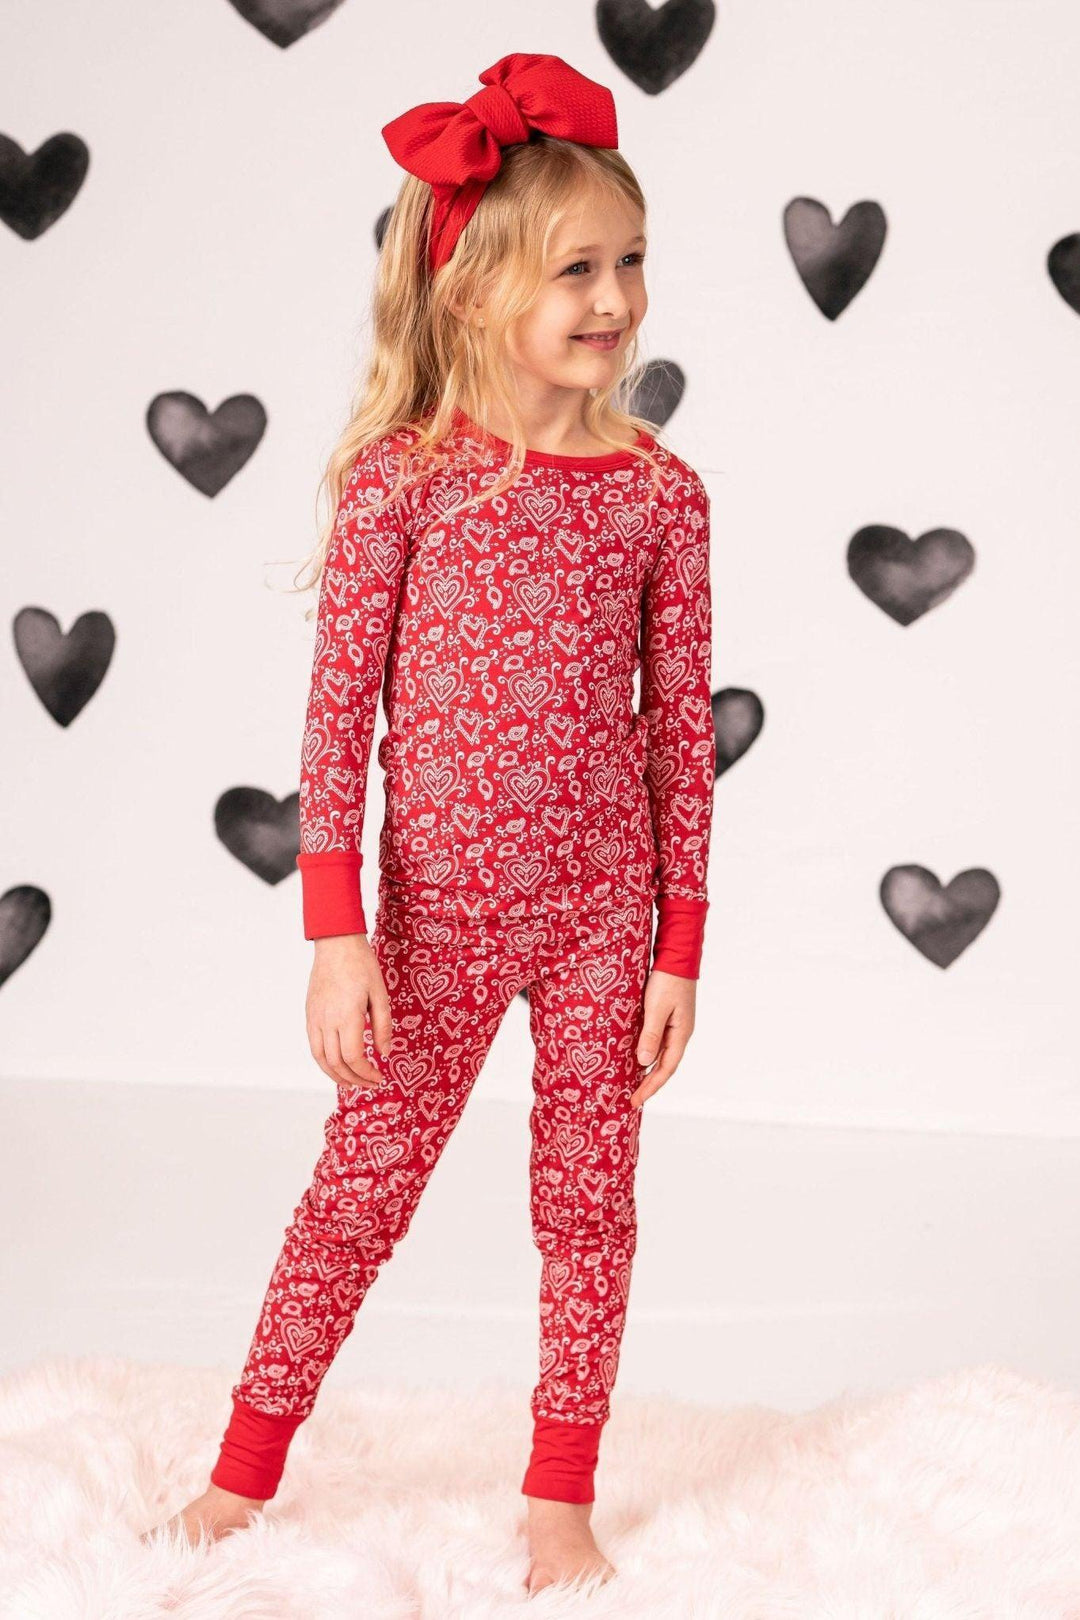 Red Paisley Hearts Valentine's Two-Piece Bamboo Kids Pajamas - Sophia Rose Children's Boutique